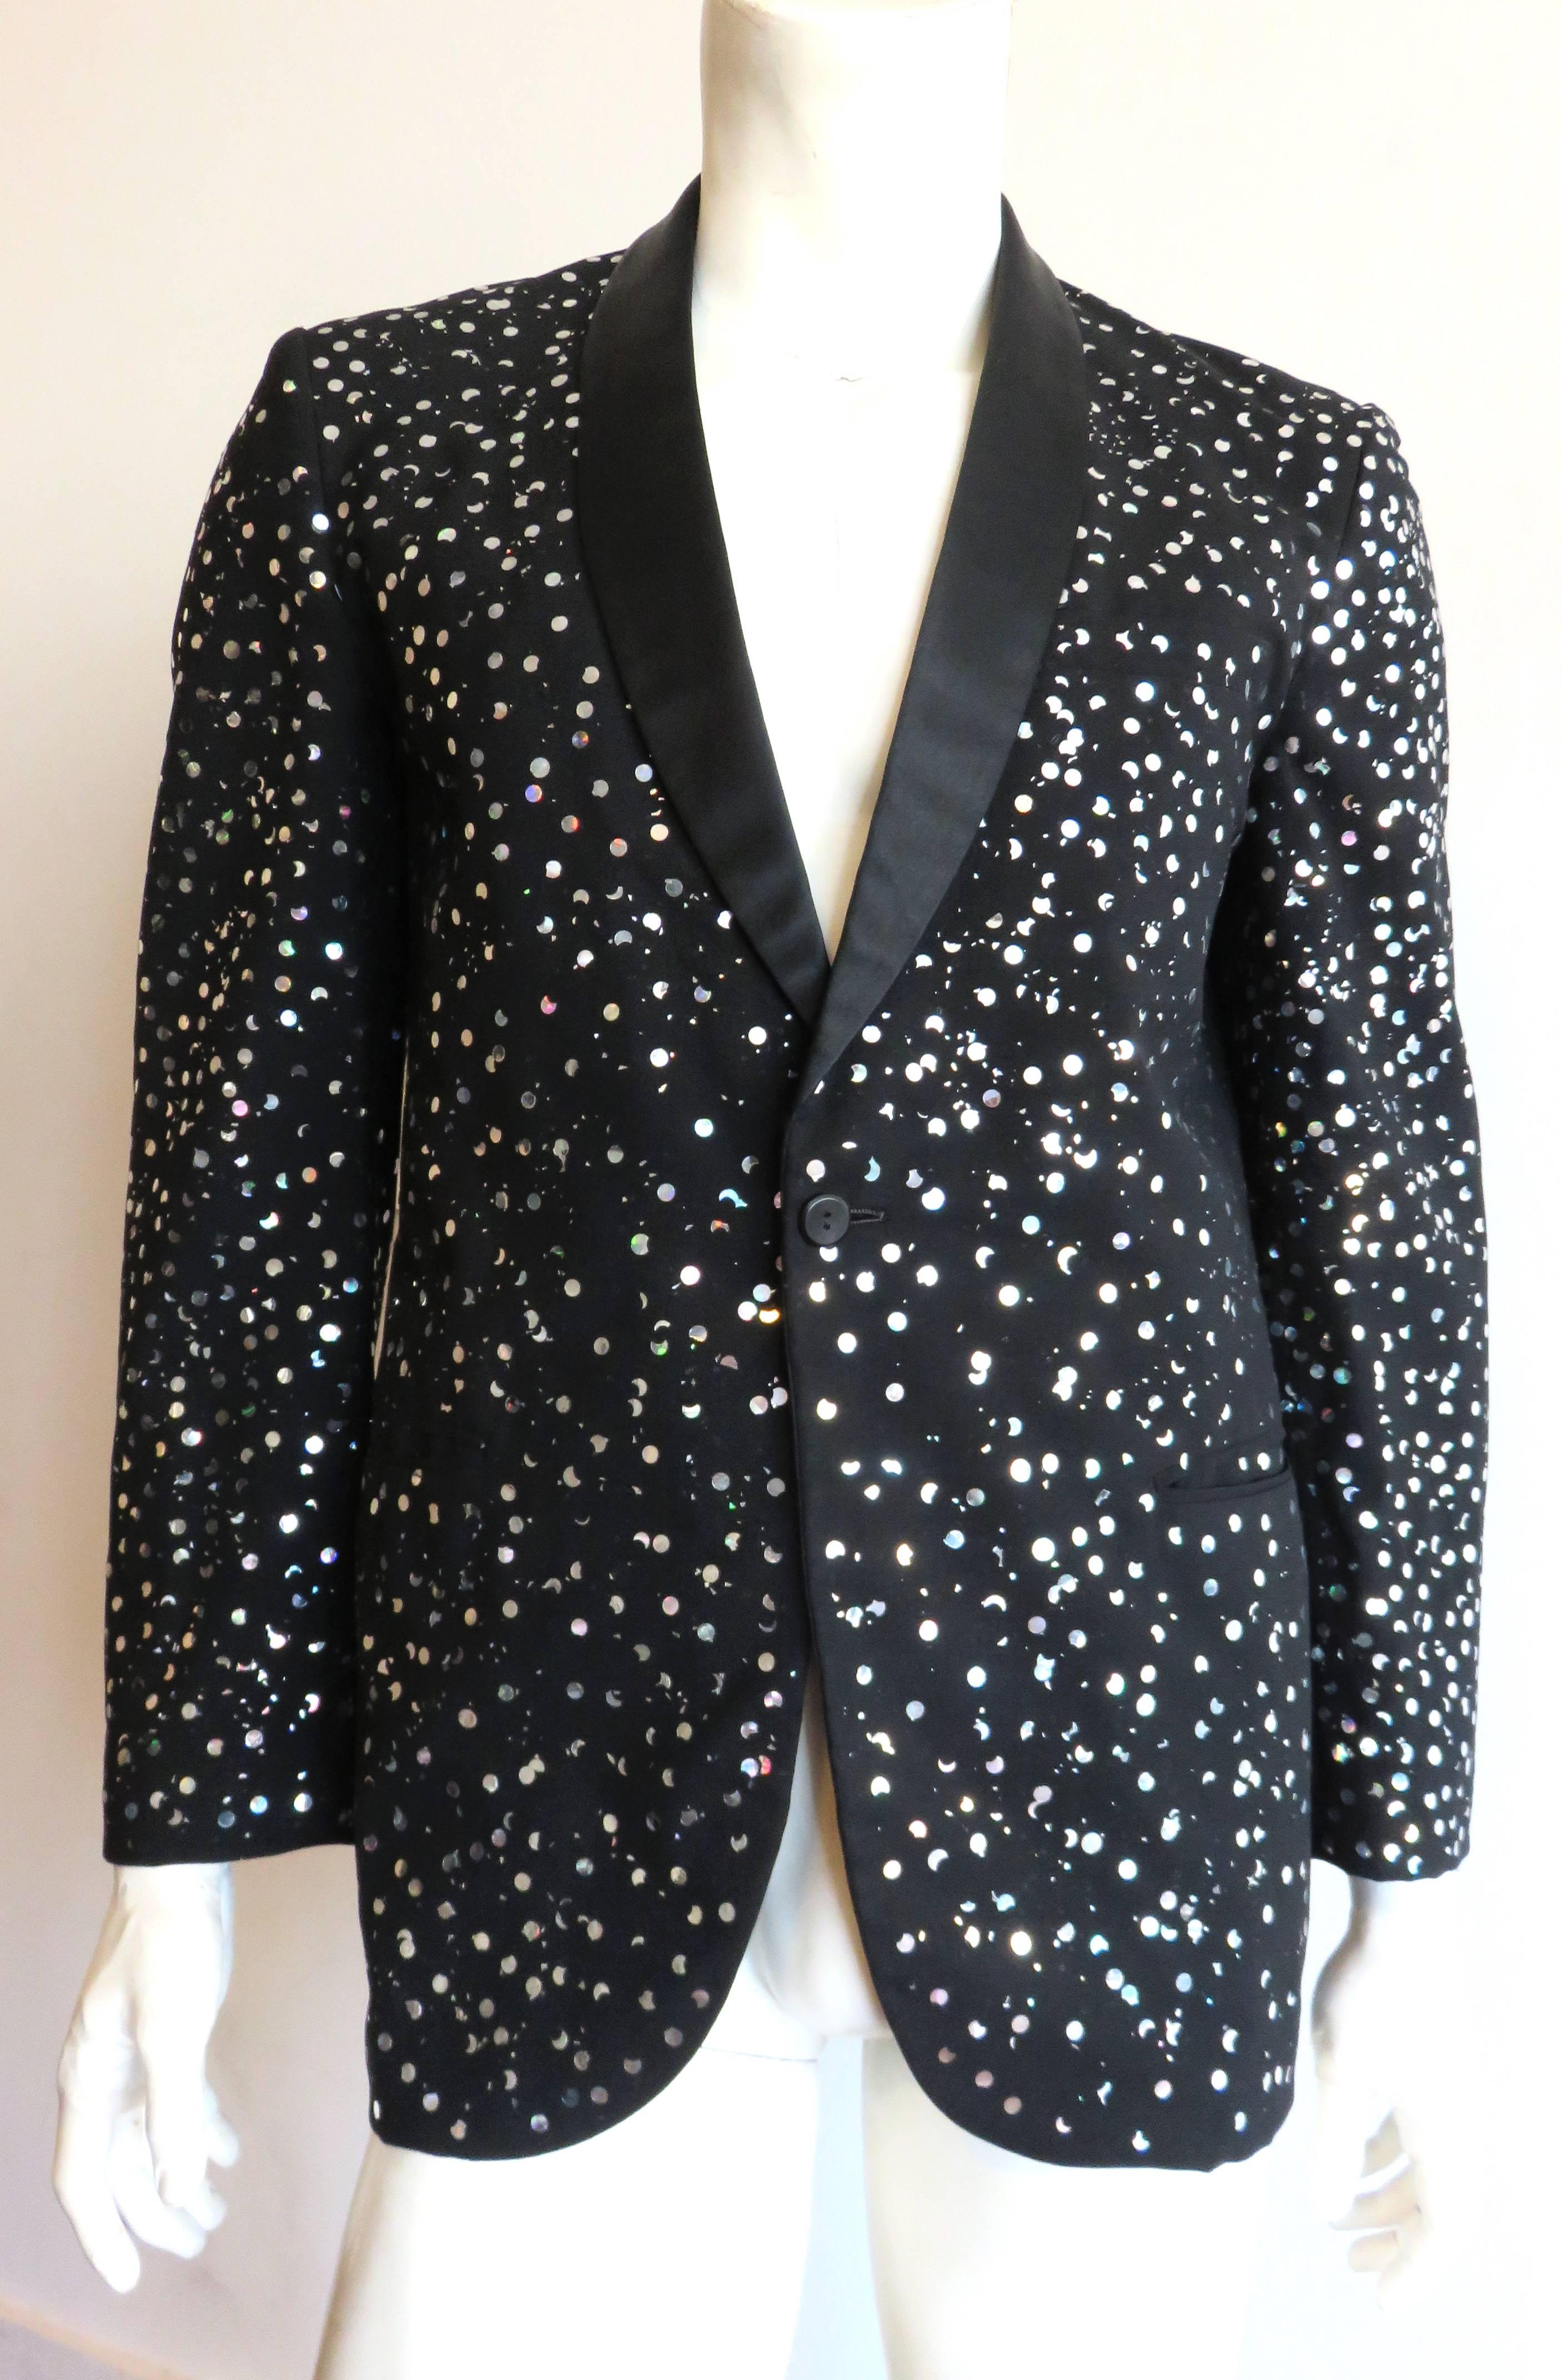 Amazing, 1980's, men's, hologram confetti, tuxedo jacket.

Single-button front closure with satin lapels, and twin, welt pockets at the waist.

Fully lined.

True, rainbow-reflective, hologram, confetti embellishment.